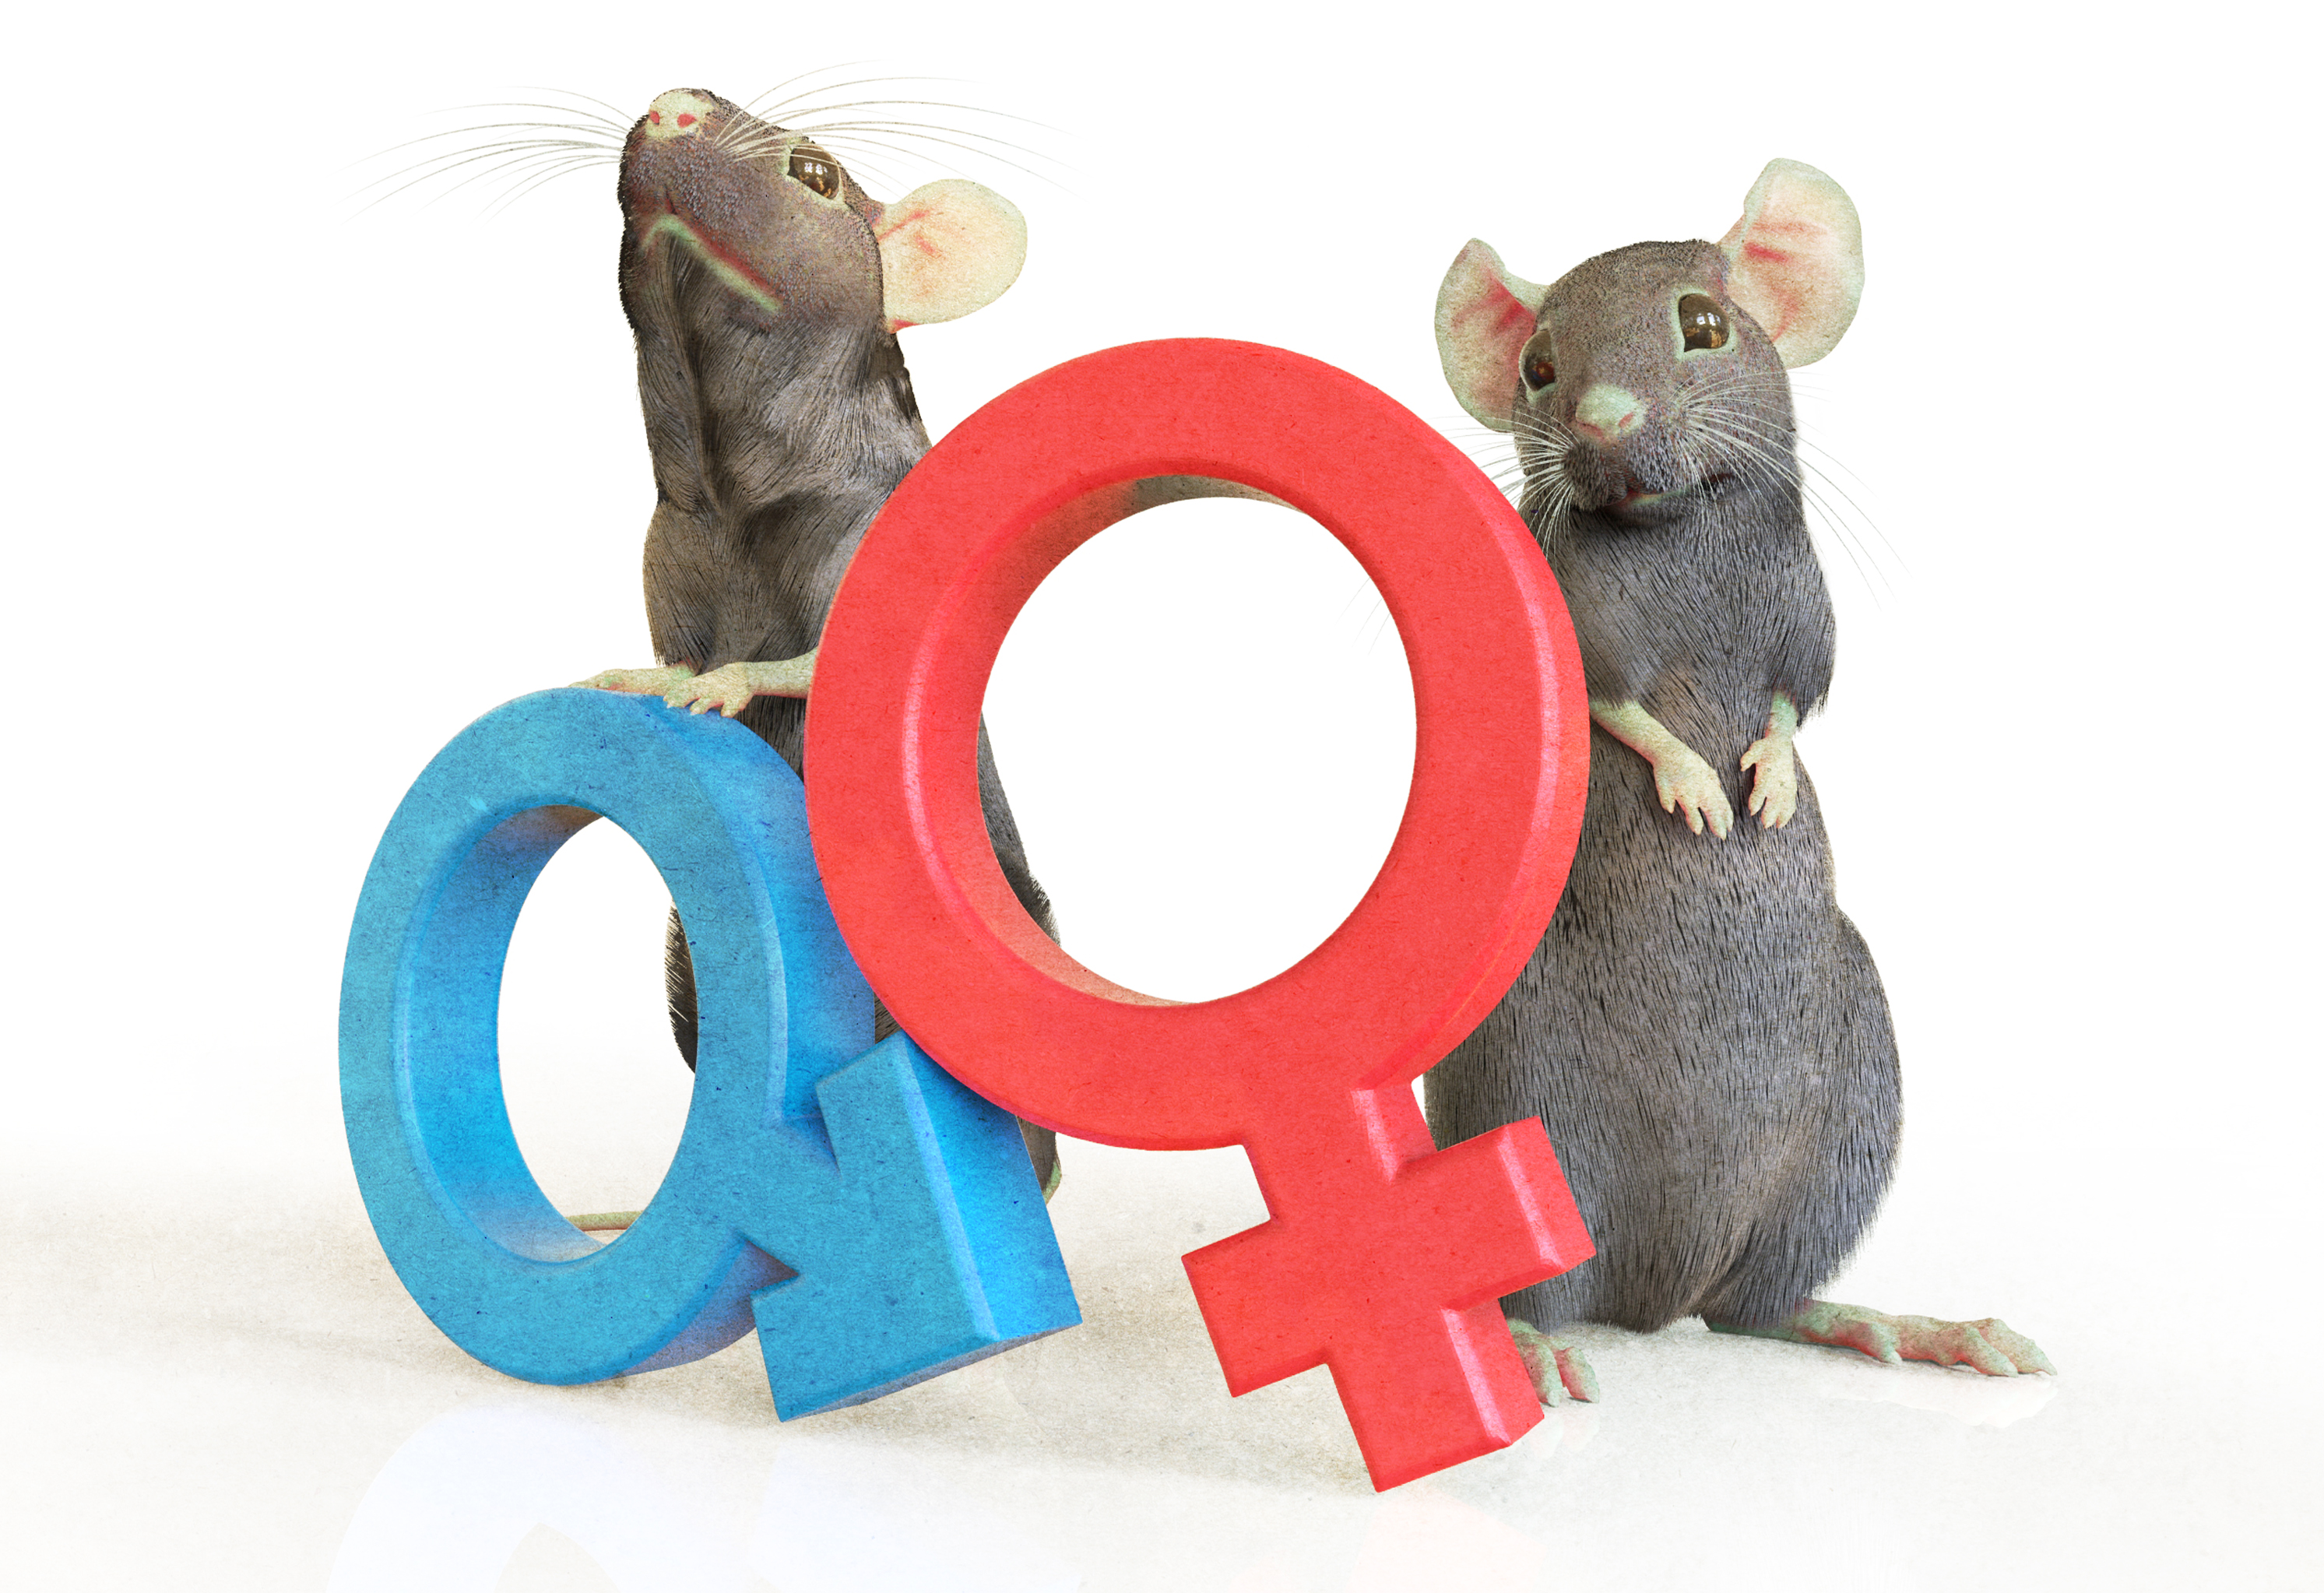 Is the sex of animals misdirecting research?